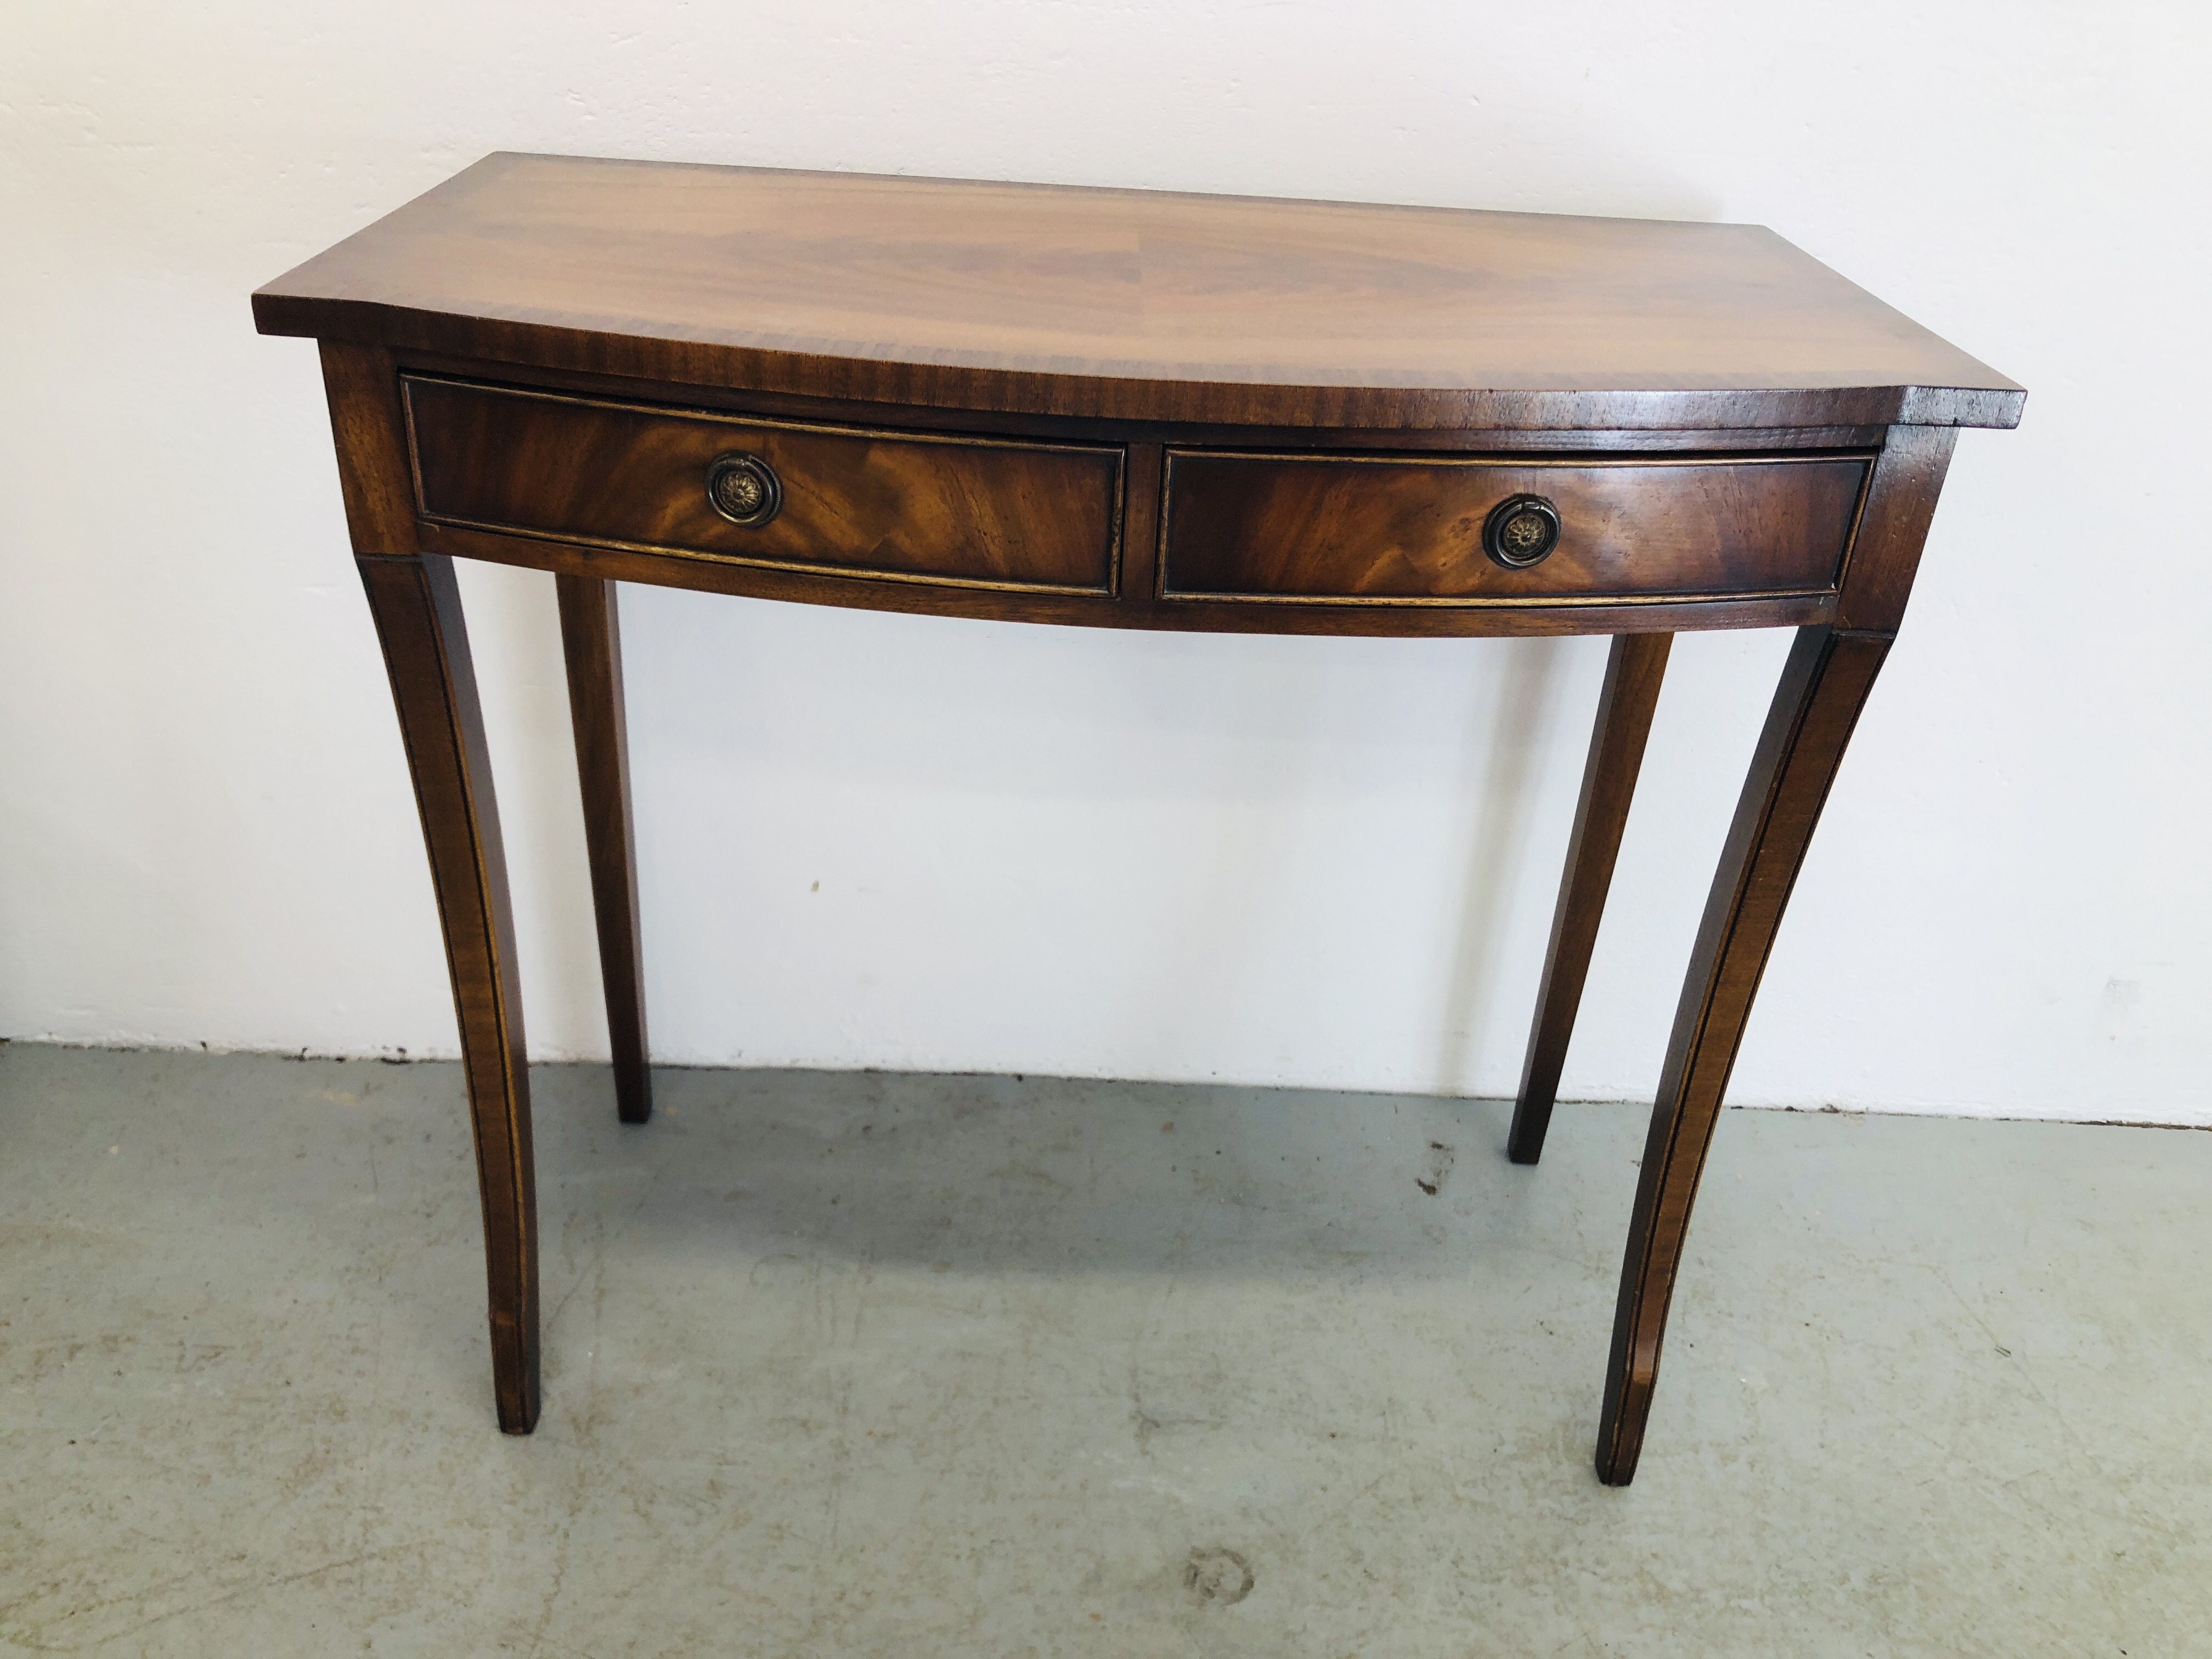 REPRODUCTION MAHOGANY FINISH COFFEE TABLE, BRADLEY MAKERS LABEL H 48CM, W 55CM, - Image 6 of 13